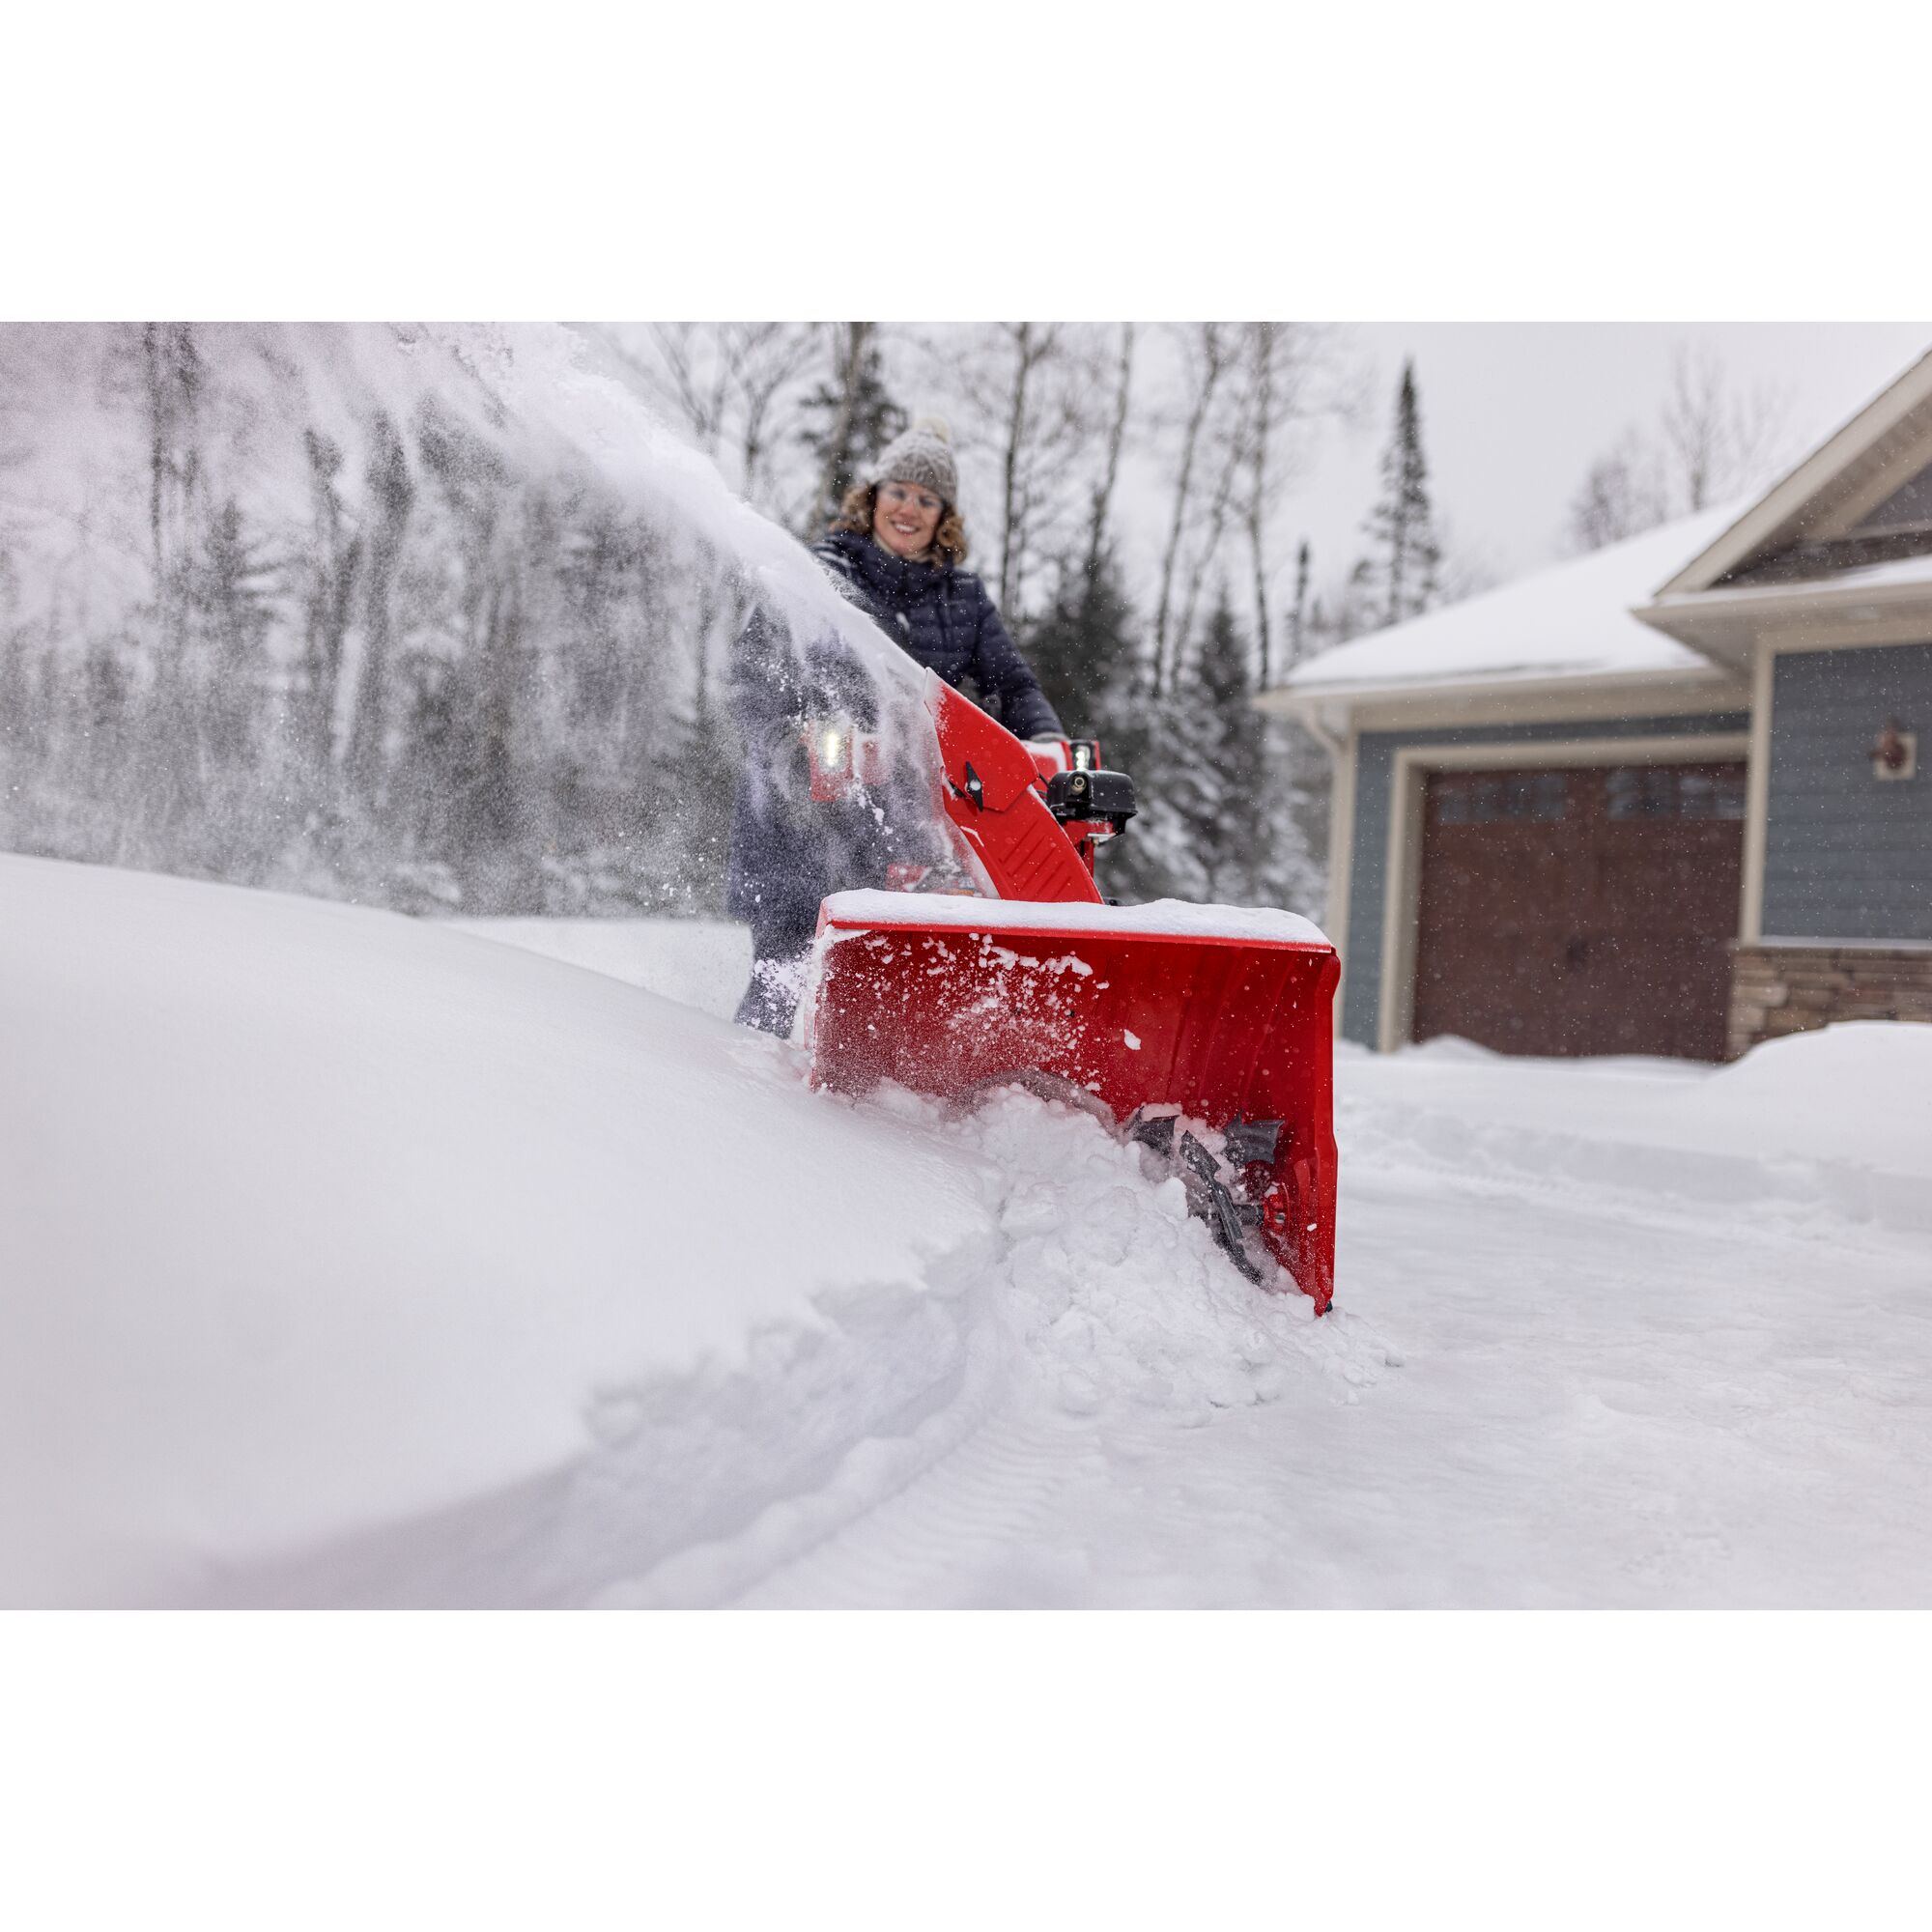 CRAFTSMAN Performance 26 V20* Start Gas Snow Blower clearing driveaway near house